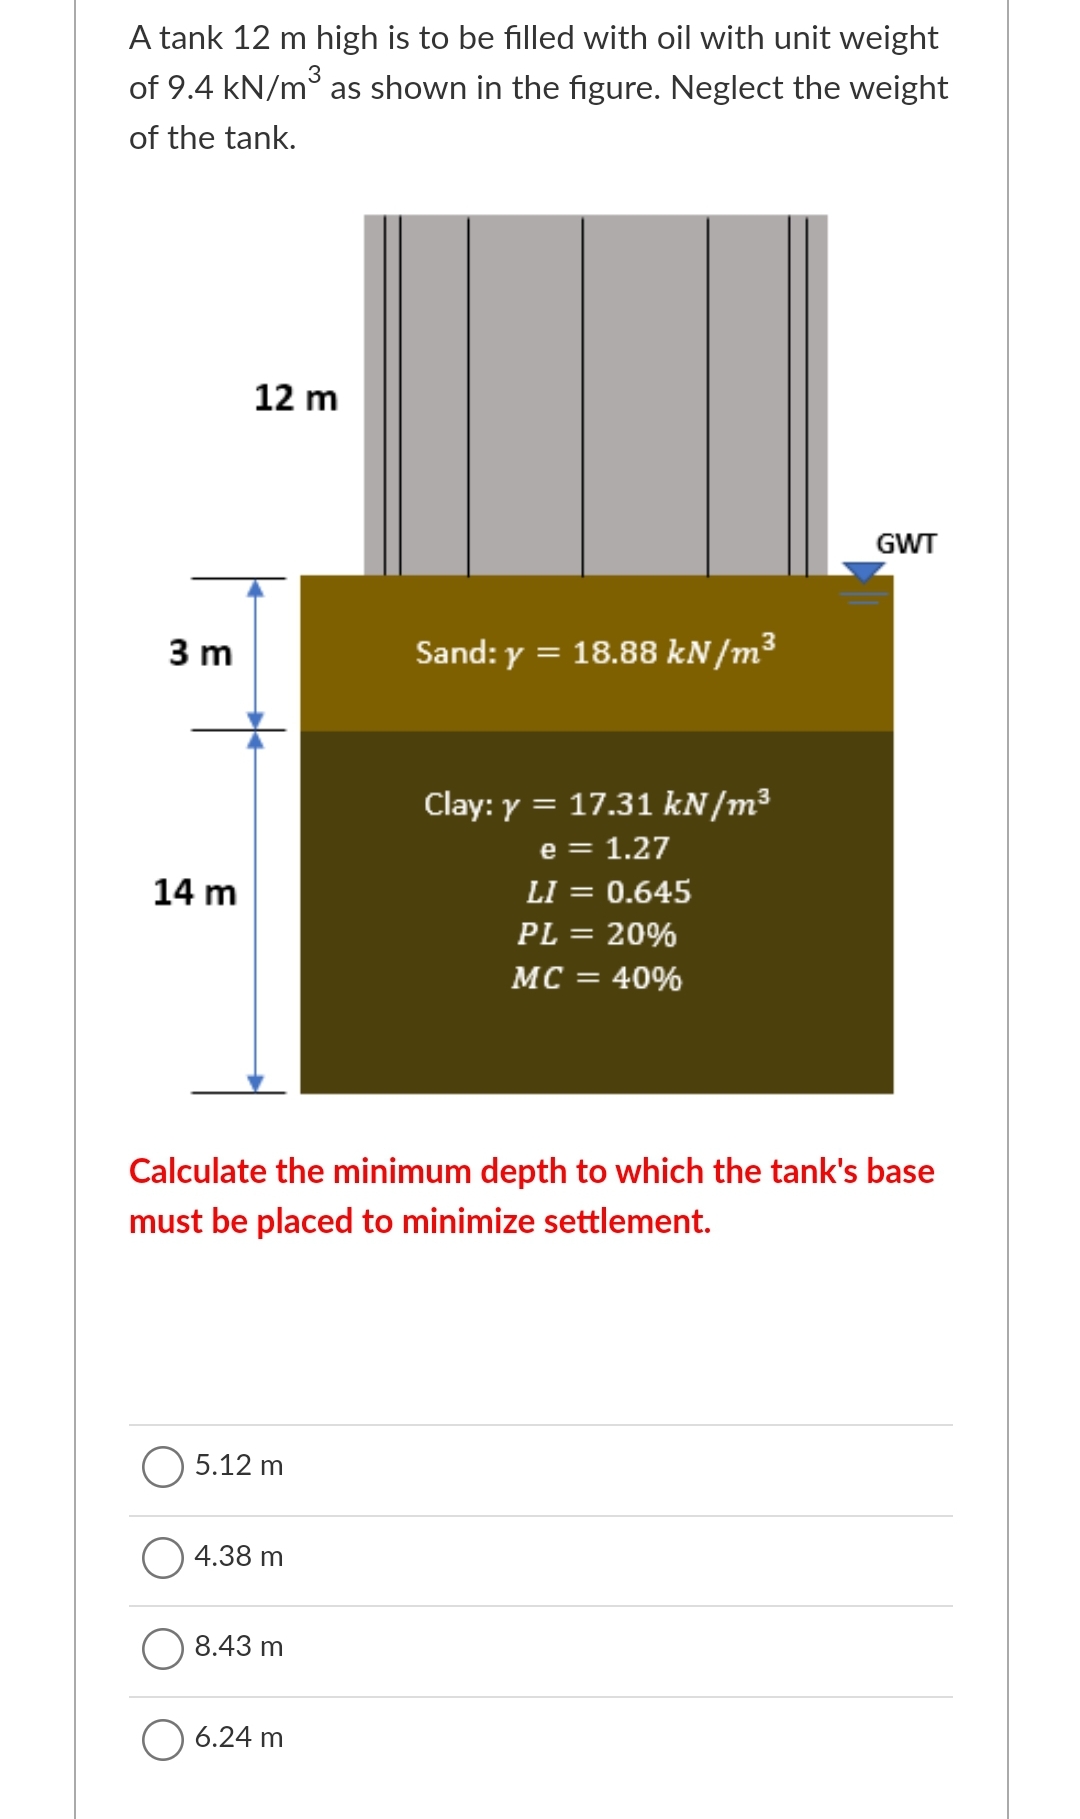 A tank 12 m high is to be filled with oil with unit weight
of 9.4 kN/m° as shown in the figure. Neglect the weight
of the tank.
12 m
GWT
3 m
Sand: y = 18.88 kN/m3
Clay: y = 17.31 kN/m³
e = 1.27
14 m
LI = 0.645
PL = 20%
%3D
MC = 40%
Calculate the minimum depth to which the tank's base
must be placed to minimize settlement.
5.12 m
4.38 m
8.43 m
O 6.24 m
